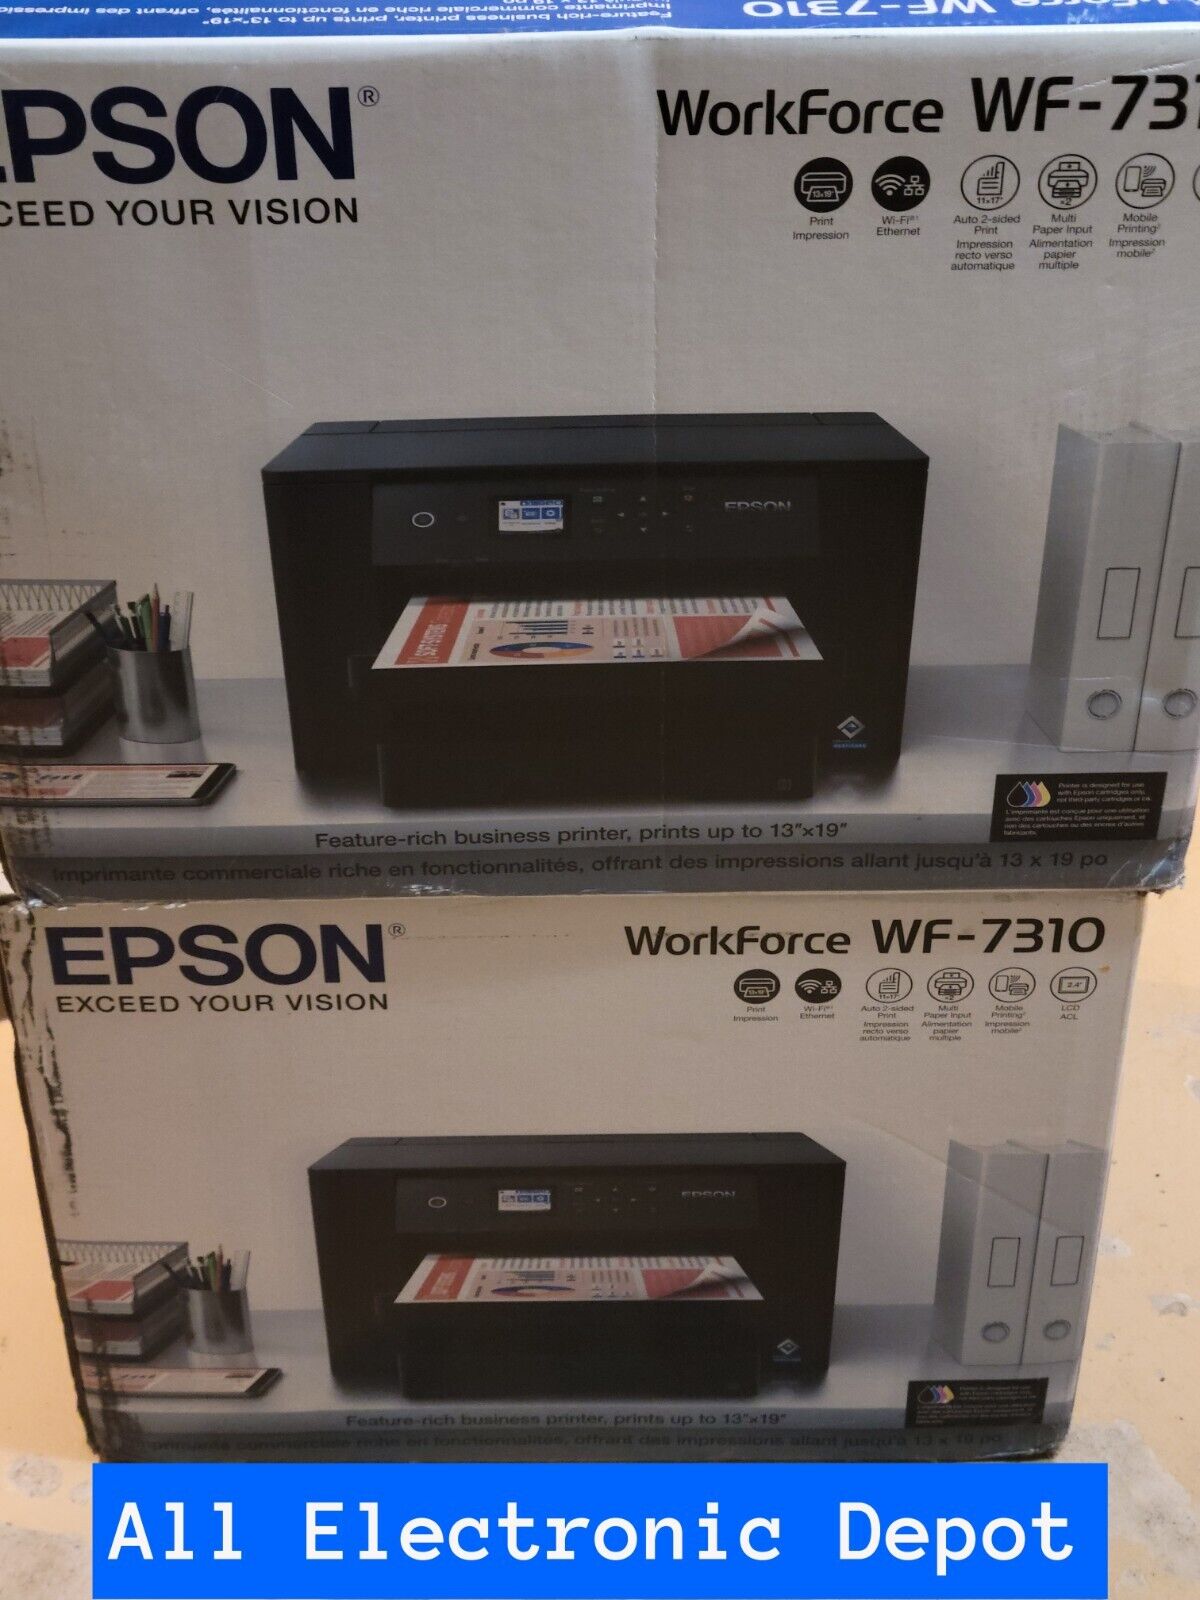 New Epson WorkForce Pro WF-7310 Wireless Color Wide-Format Printer